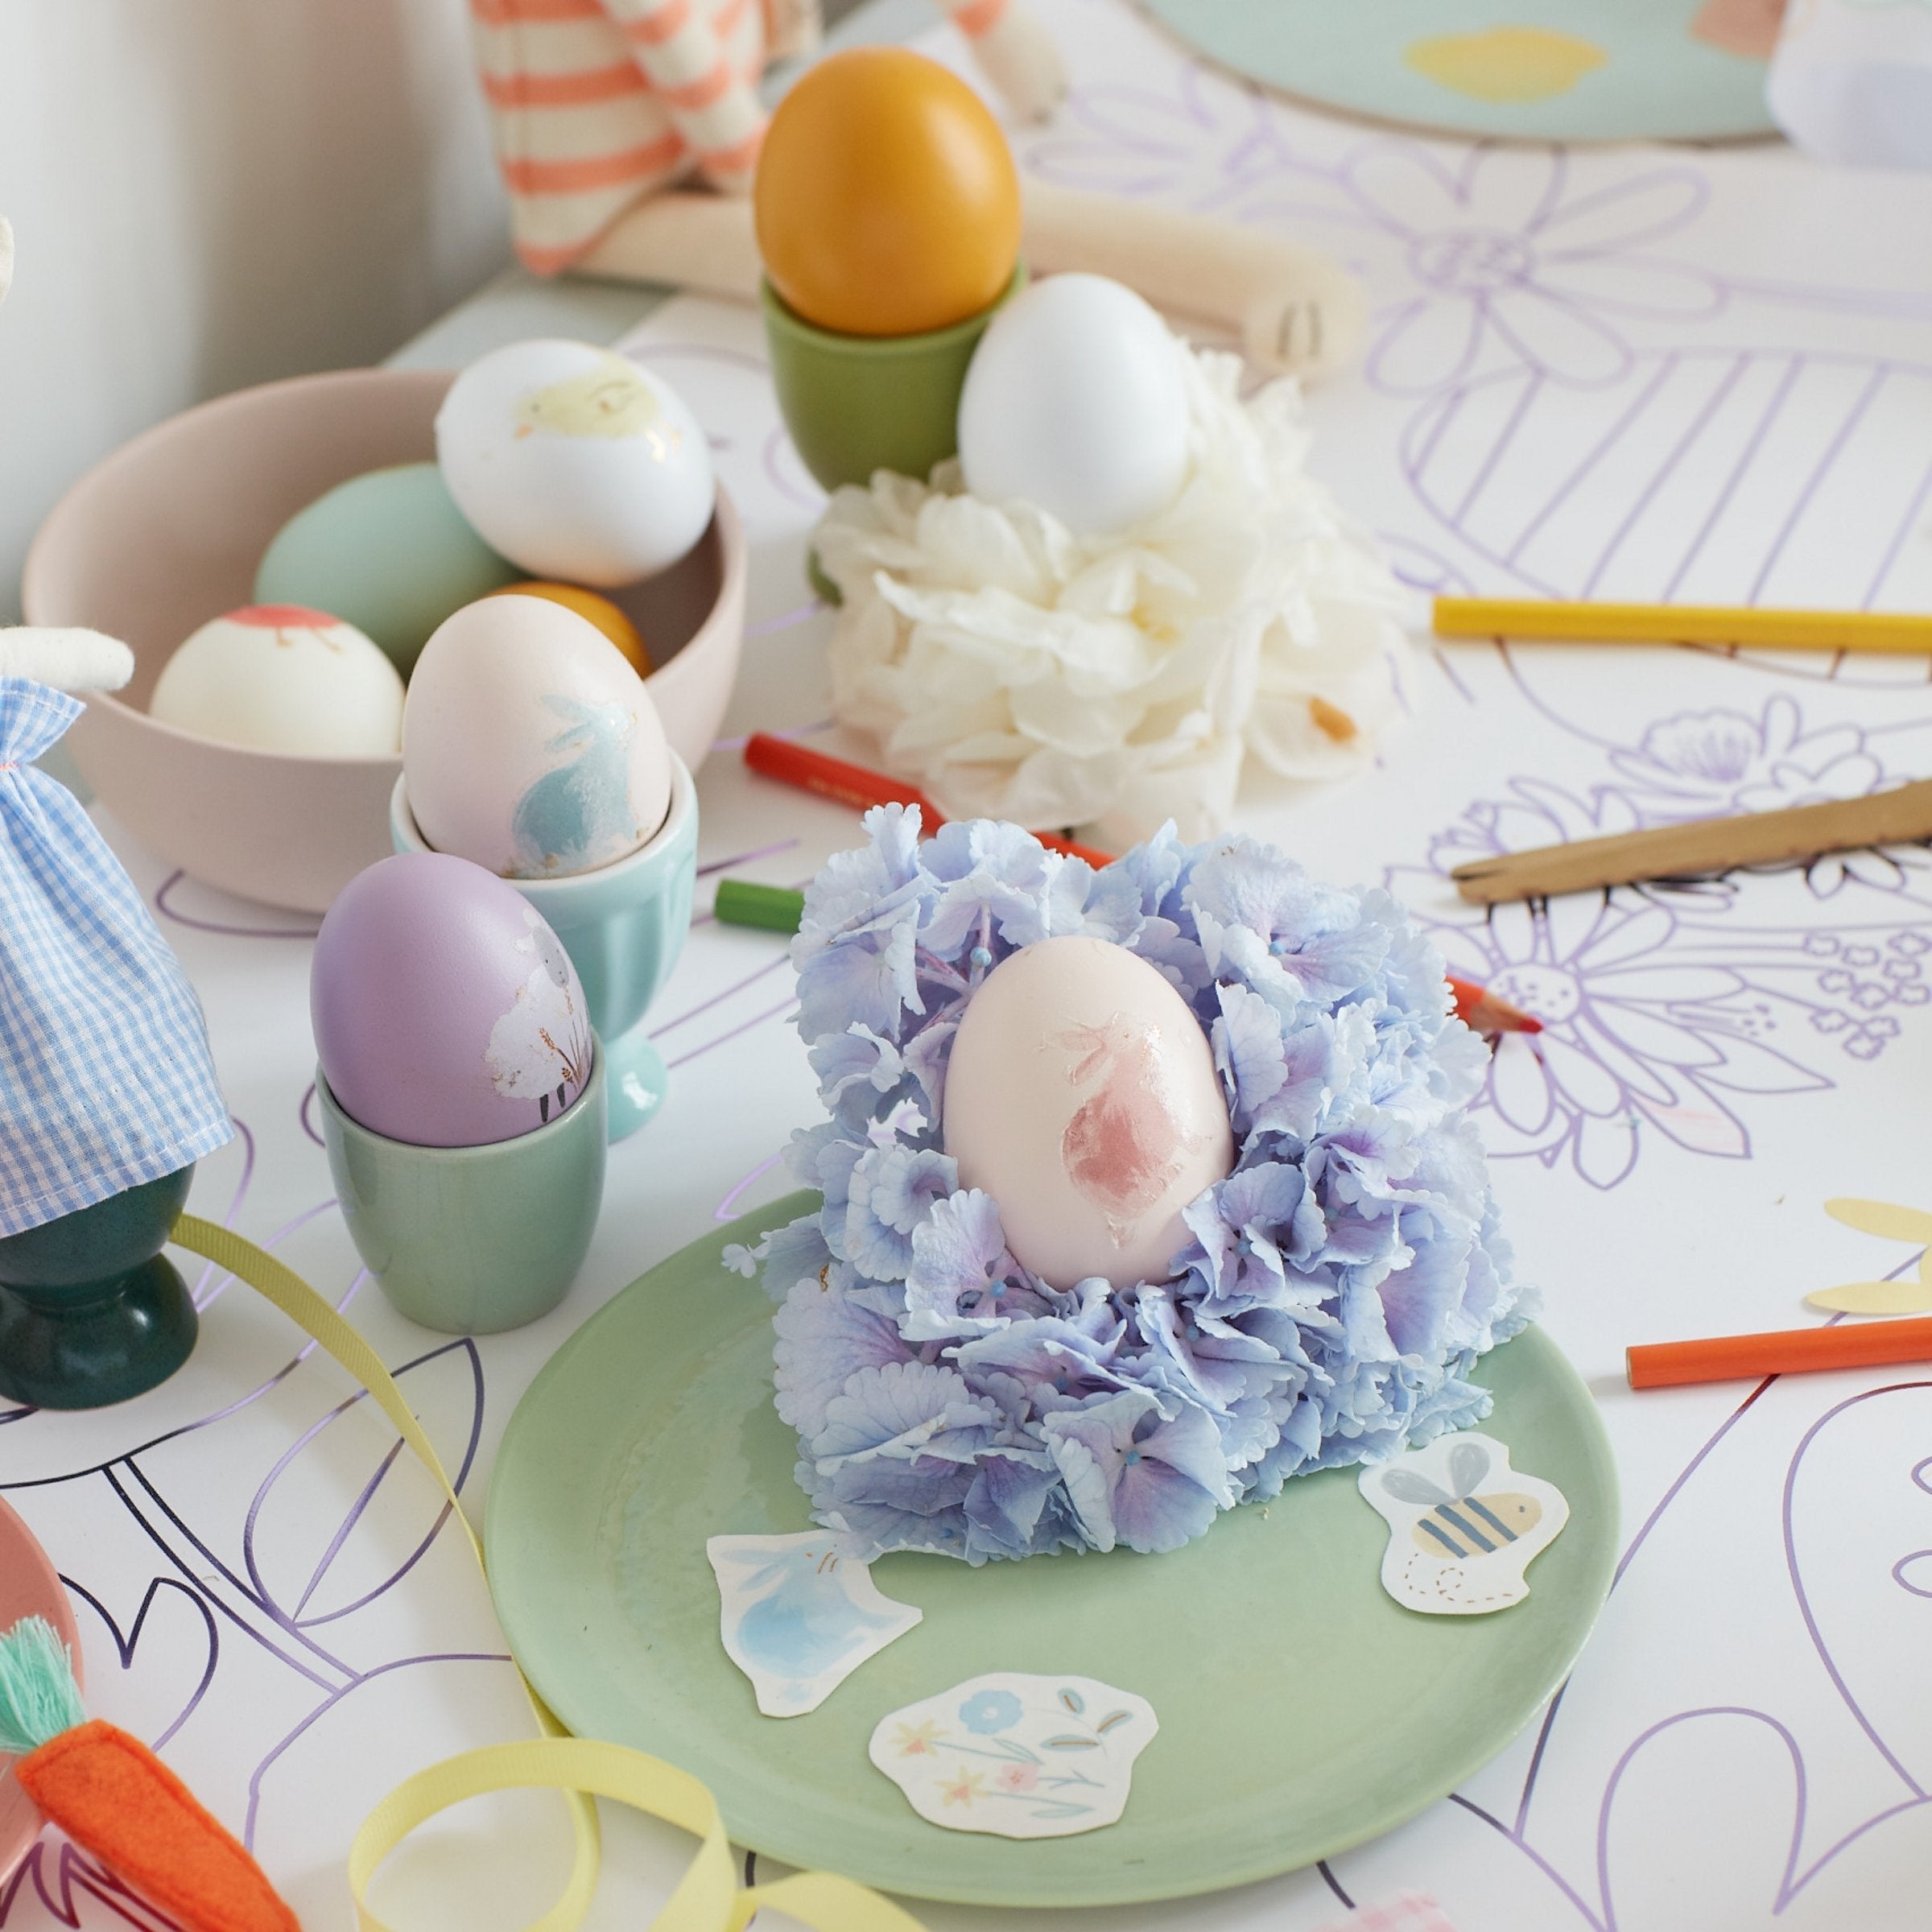 The kit contains 27 tattoos, of bunnies, carrots, flowers, birds and bees, to decorate your eggs with.